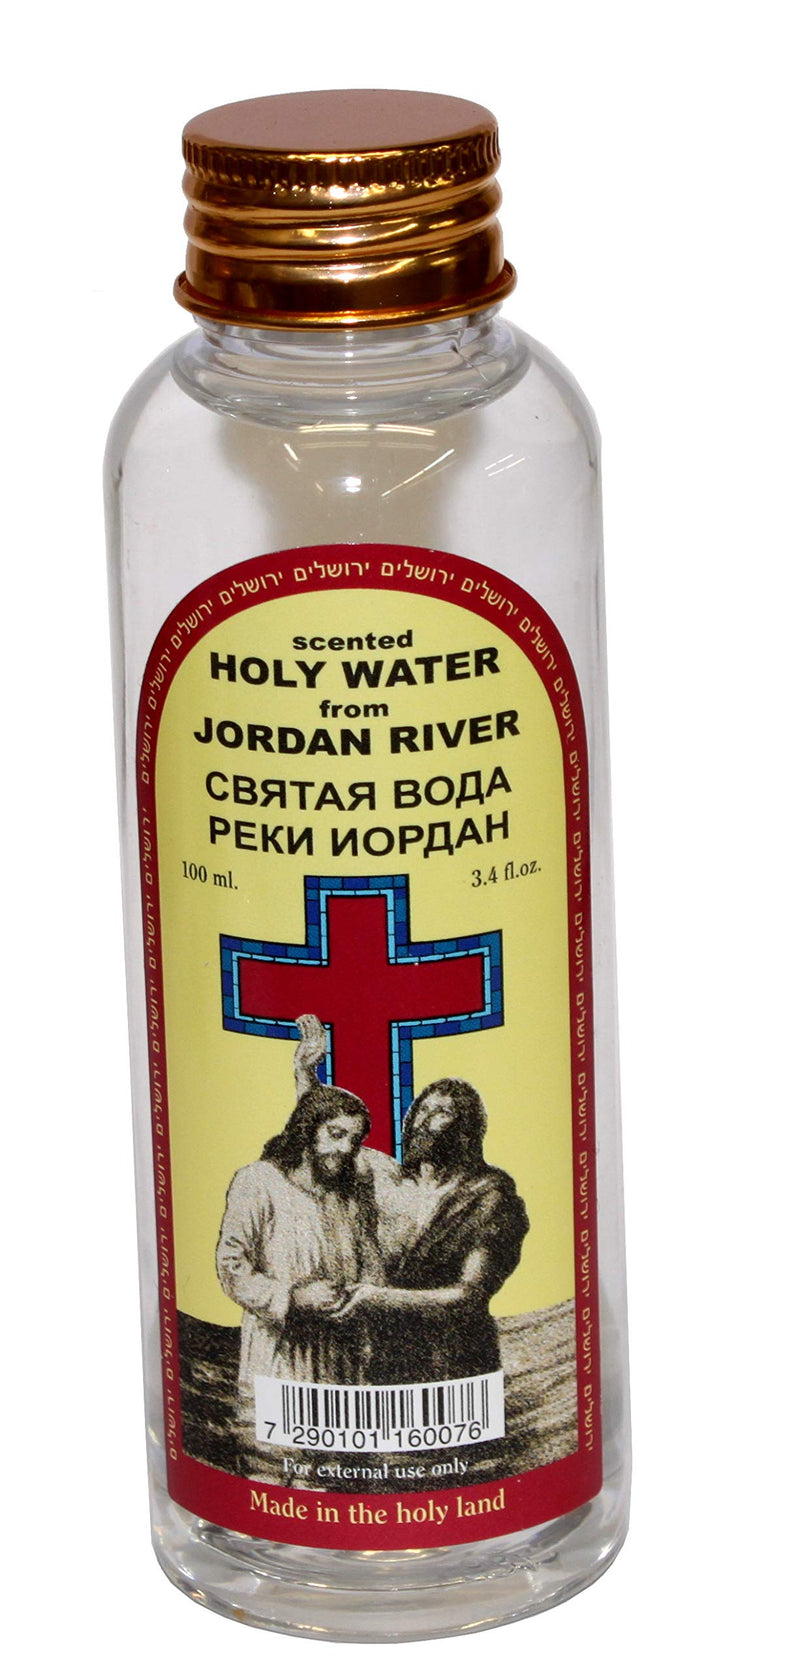 Scented Holy Water From the Jordan River - 100 ml (3.4 fl. oz.) Baptism of our Lord with Red Cross model